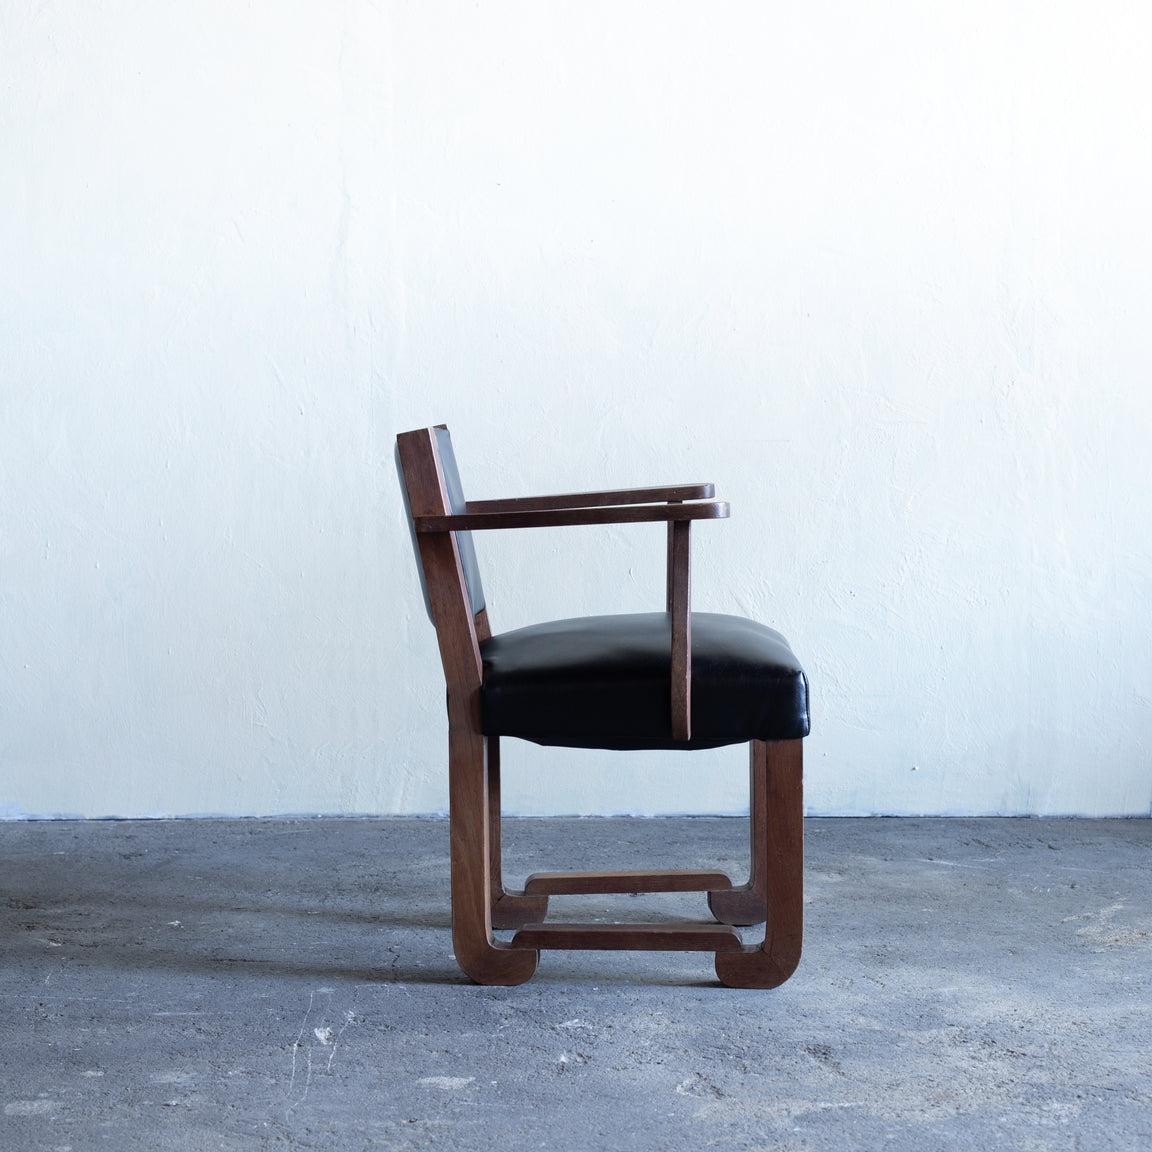 Sculptural Art Déco chair with arm designed by French designer Francisque Chaleyssin.
Solid oar wood structure and recent black leather upholstered seat and back.